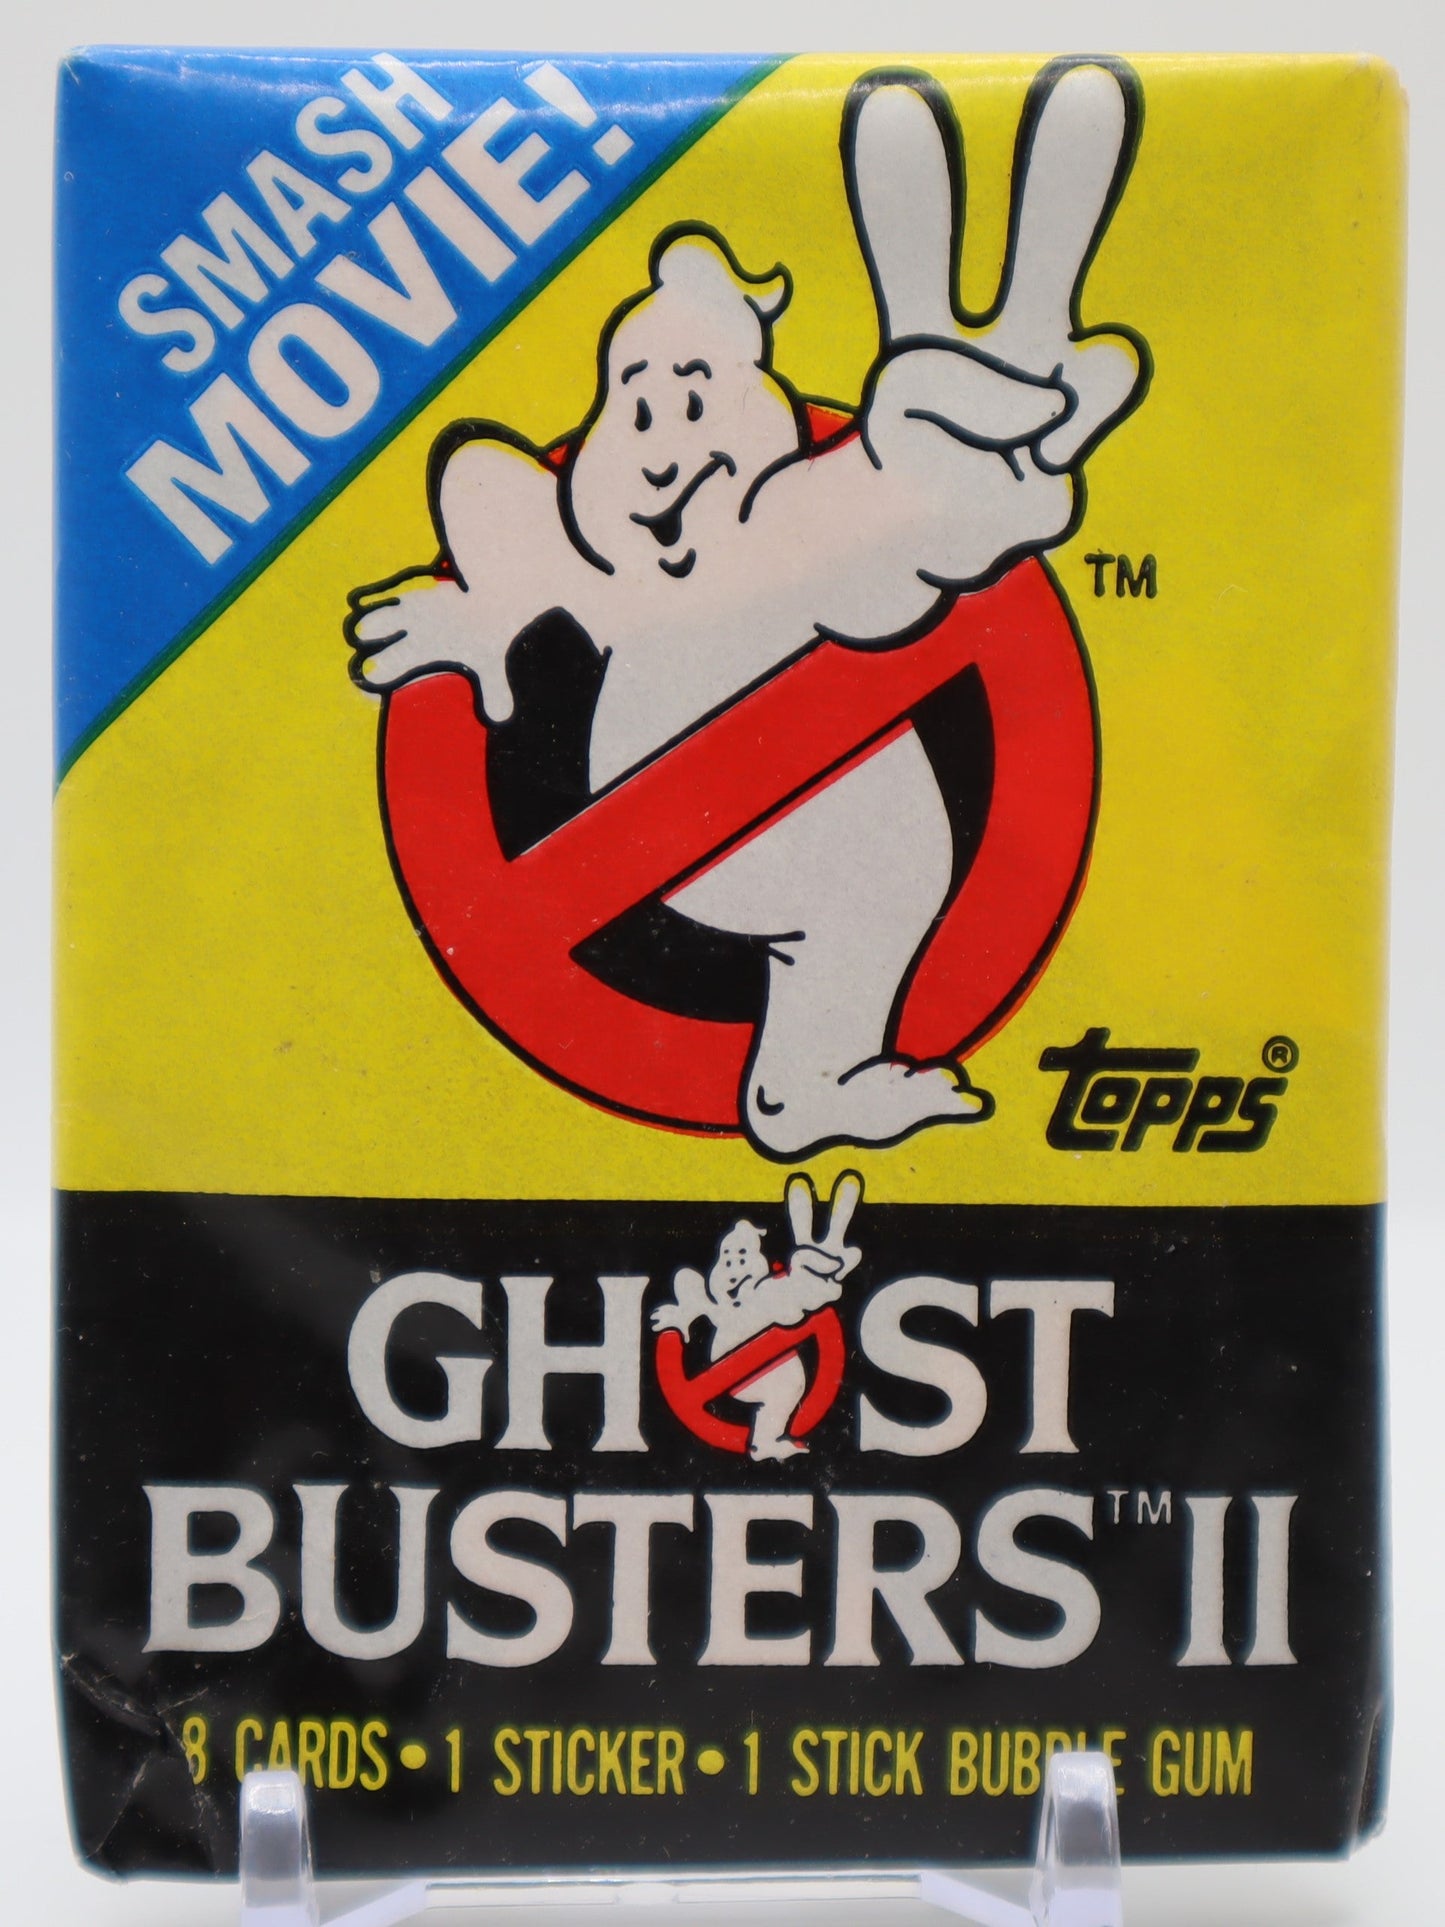 1989 Topps Ghostbusters II Trading Cards Wax Pack - Collectibles